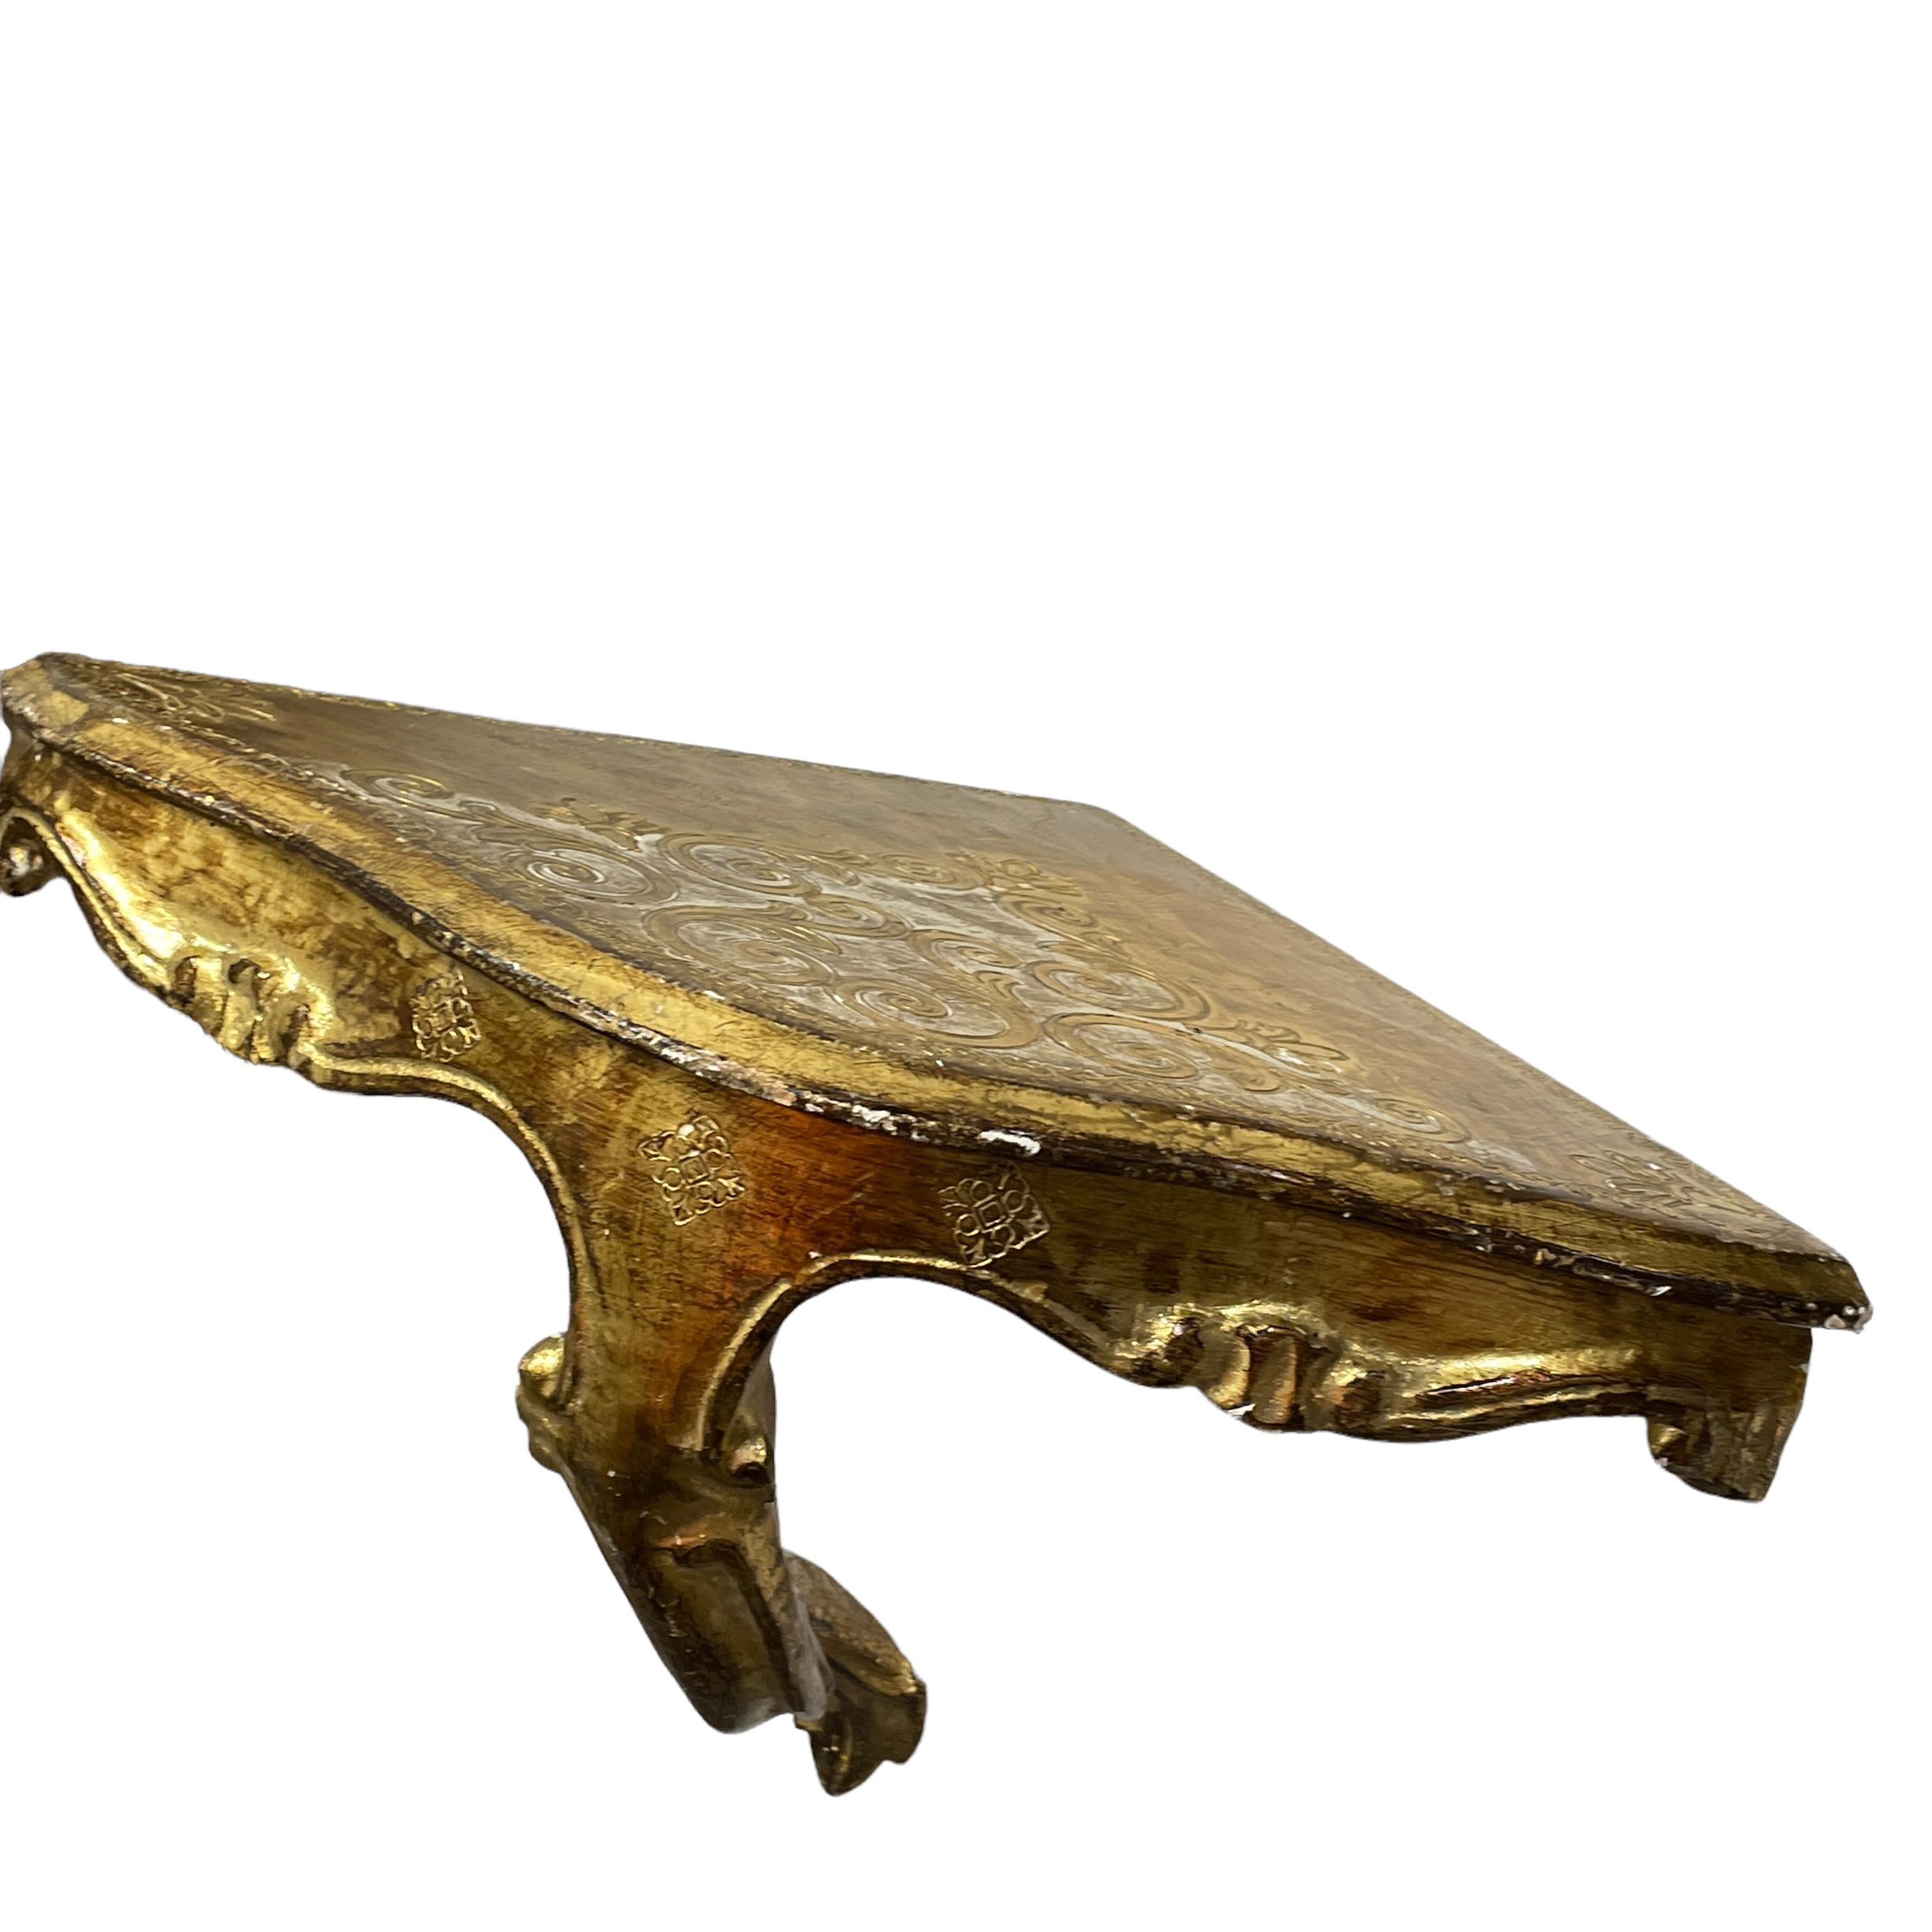 Vintage Florence Wall Corner Shelf Console, Gilded Carved Wood, Florentine Style For Sale 7